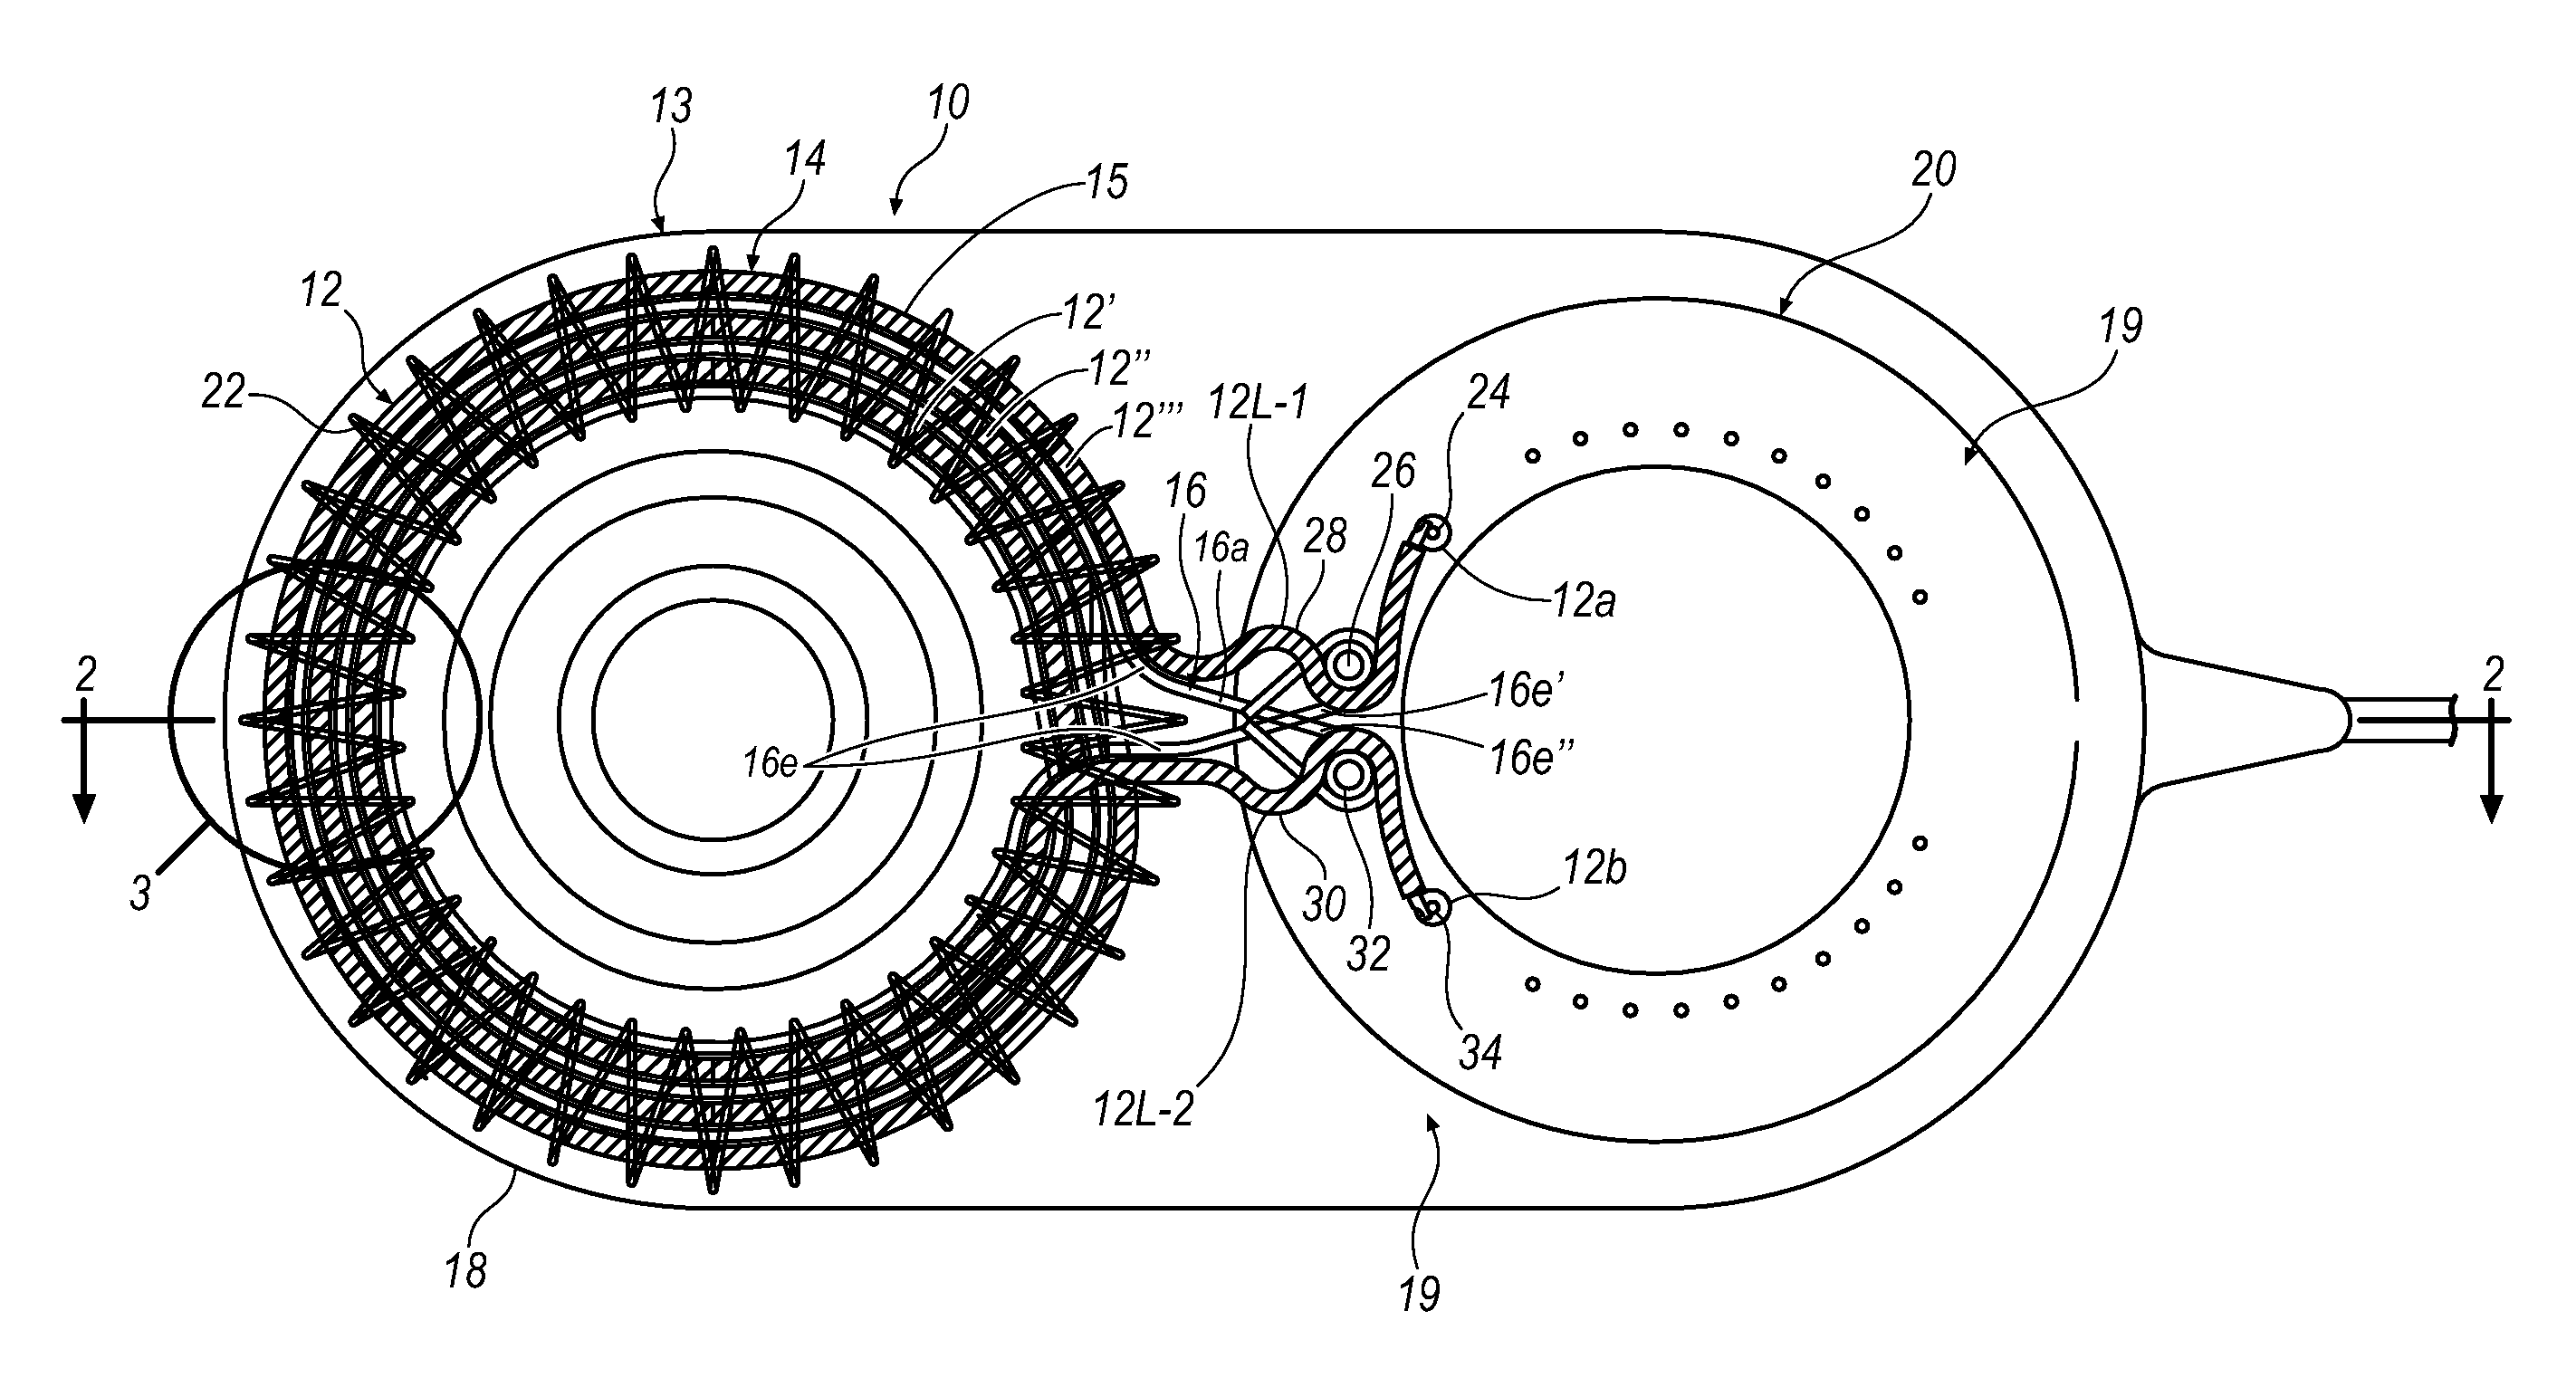 Impact resistant implantable antenna coil assembly